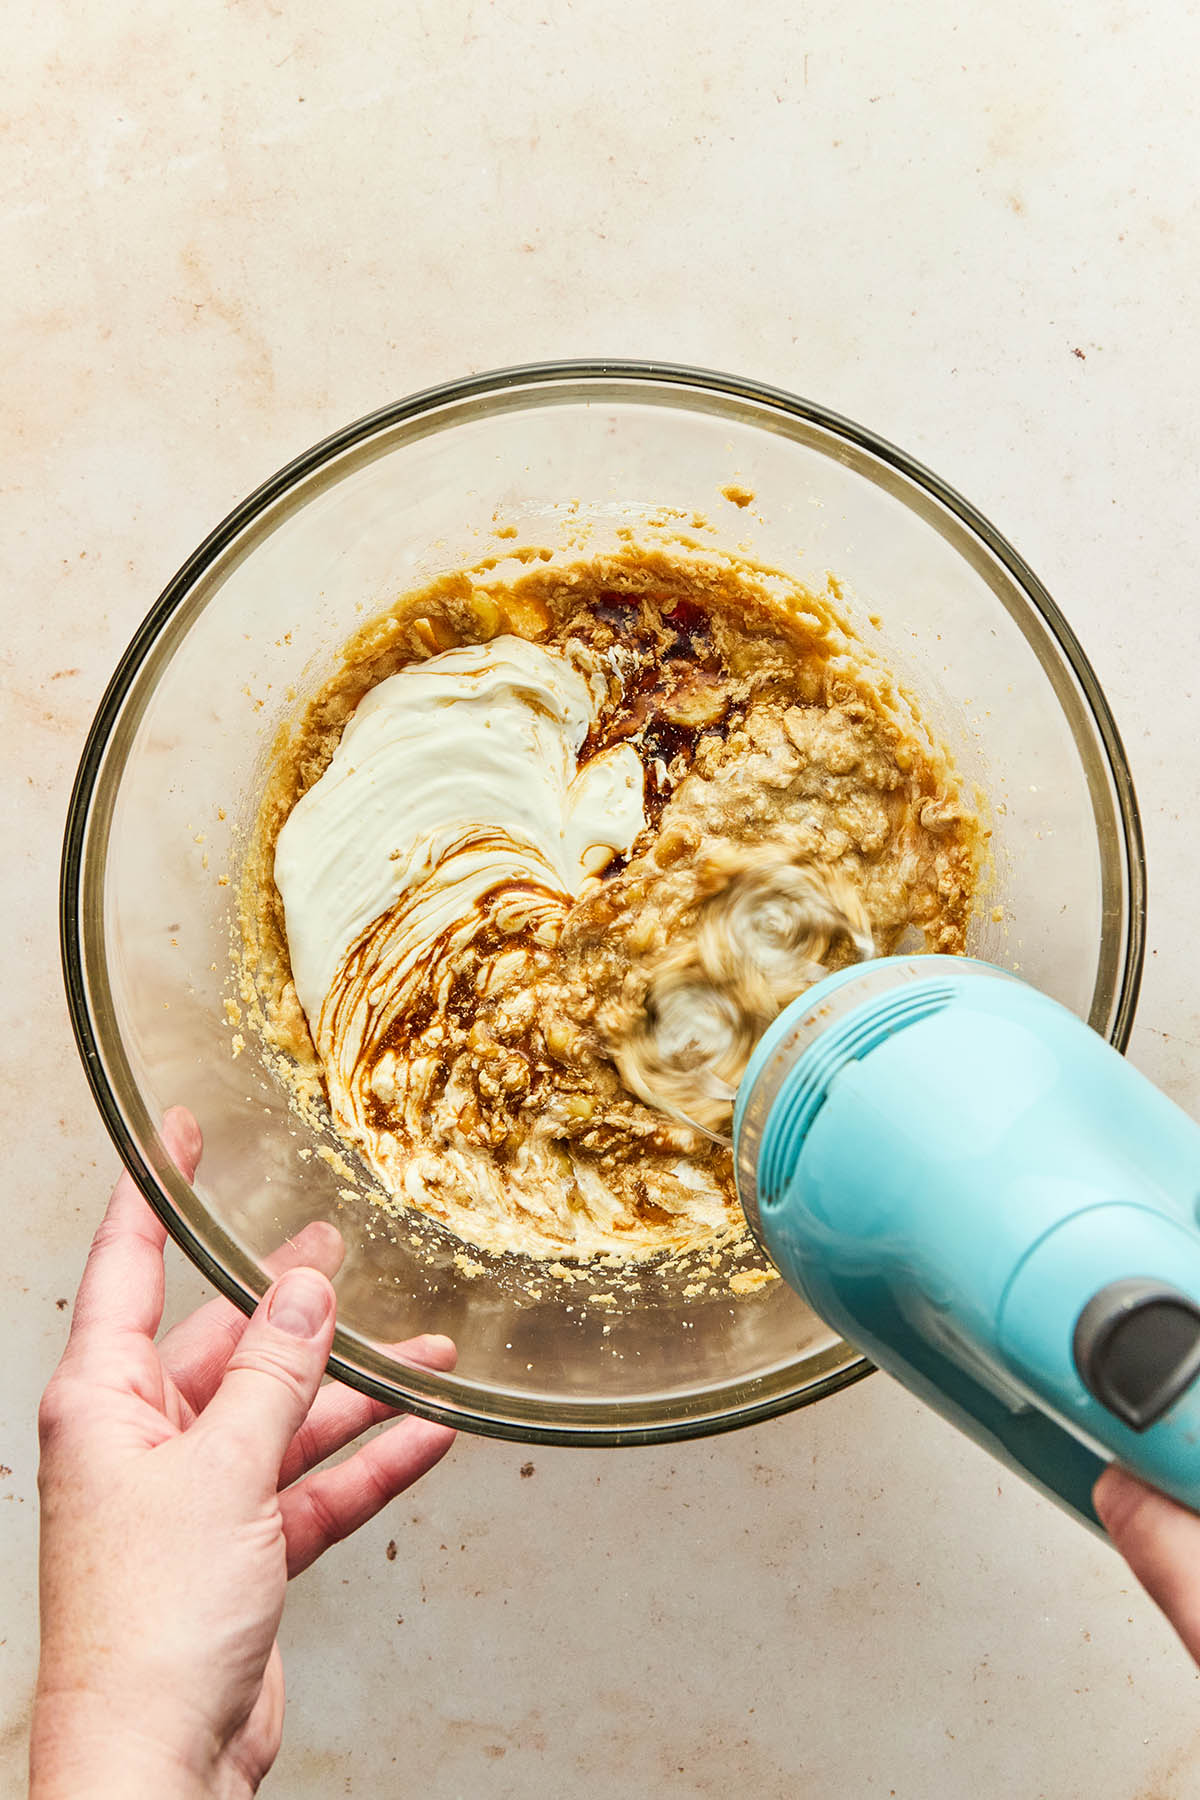 A hand using a hand mixer to mix wet ingredients in a glass bowl.